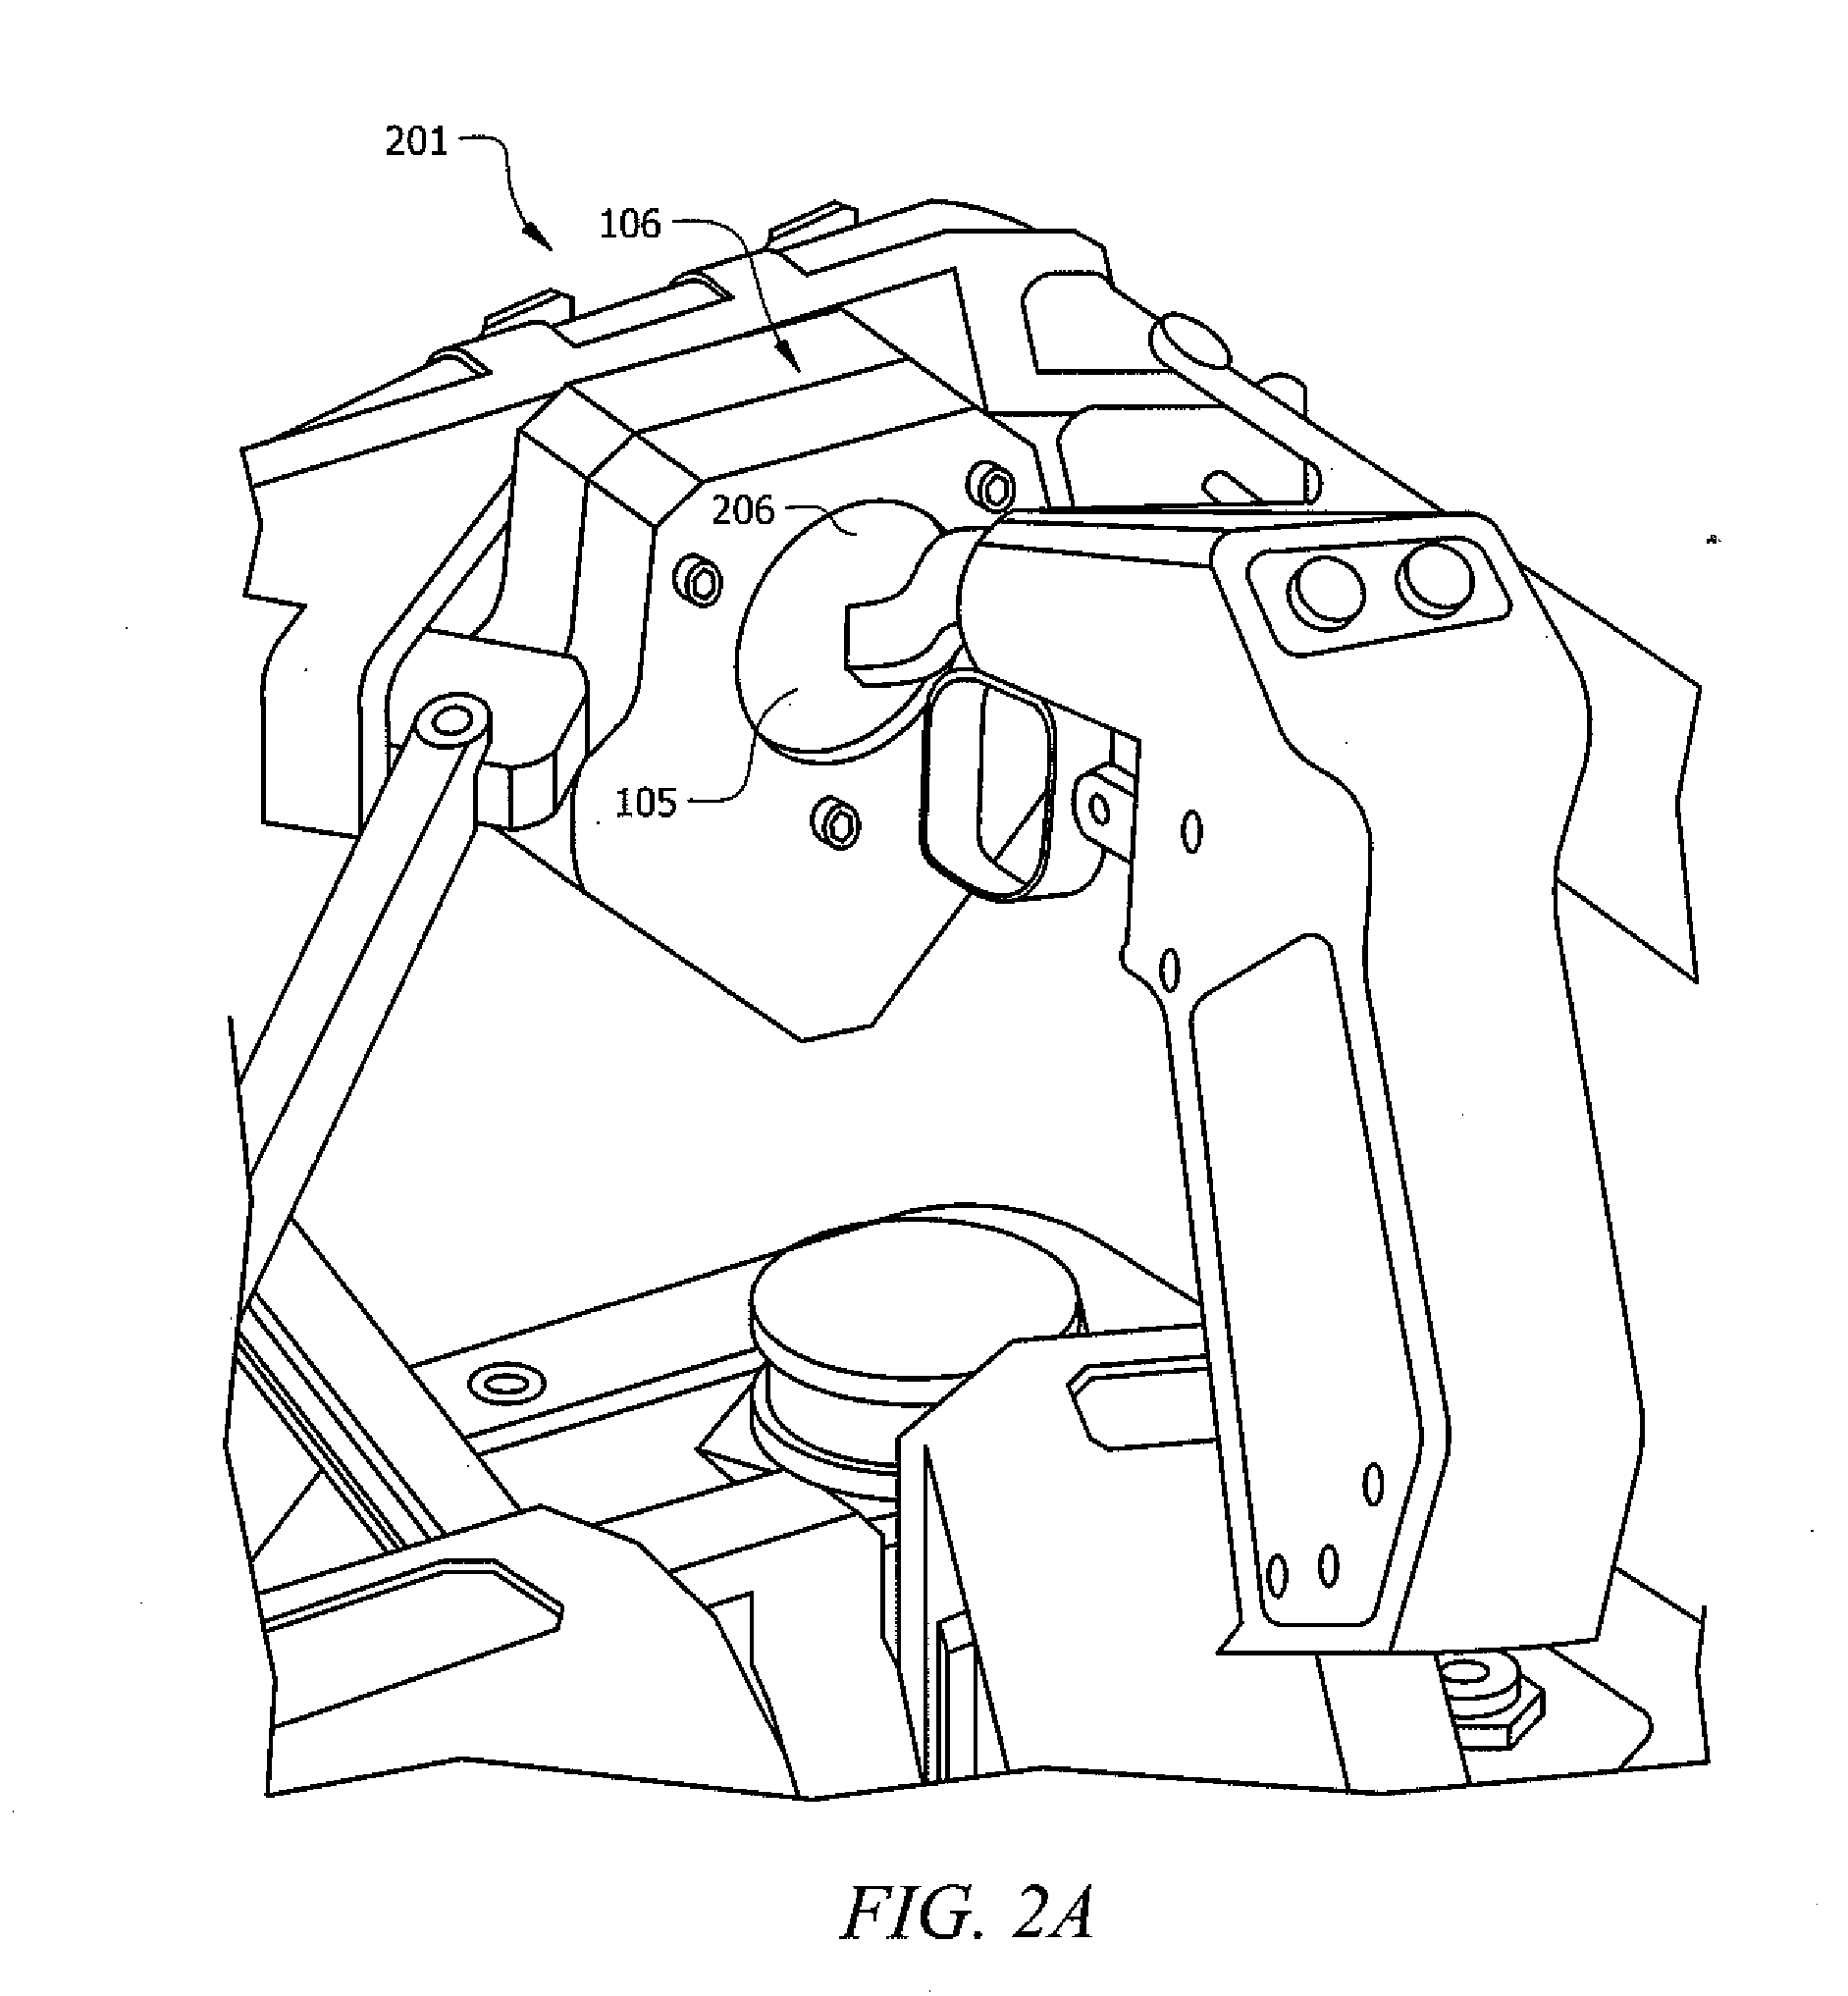 Haptic device for manipulator and vehicle control